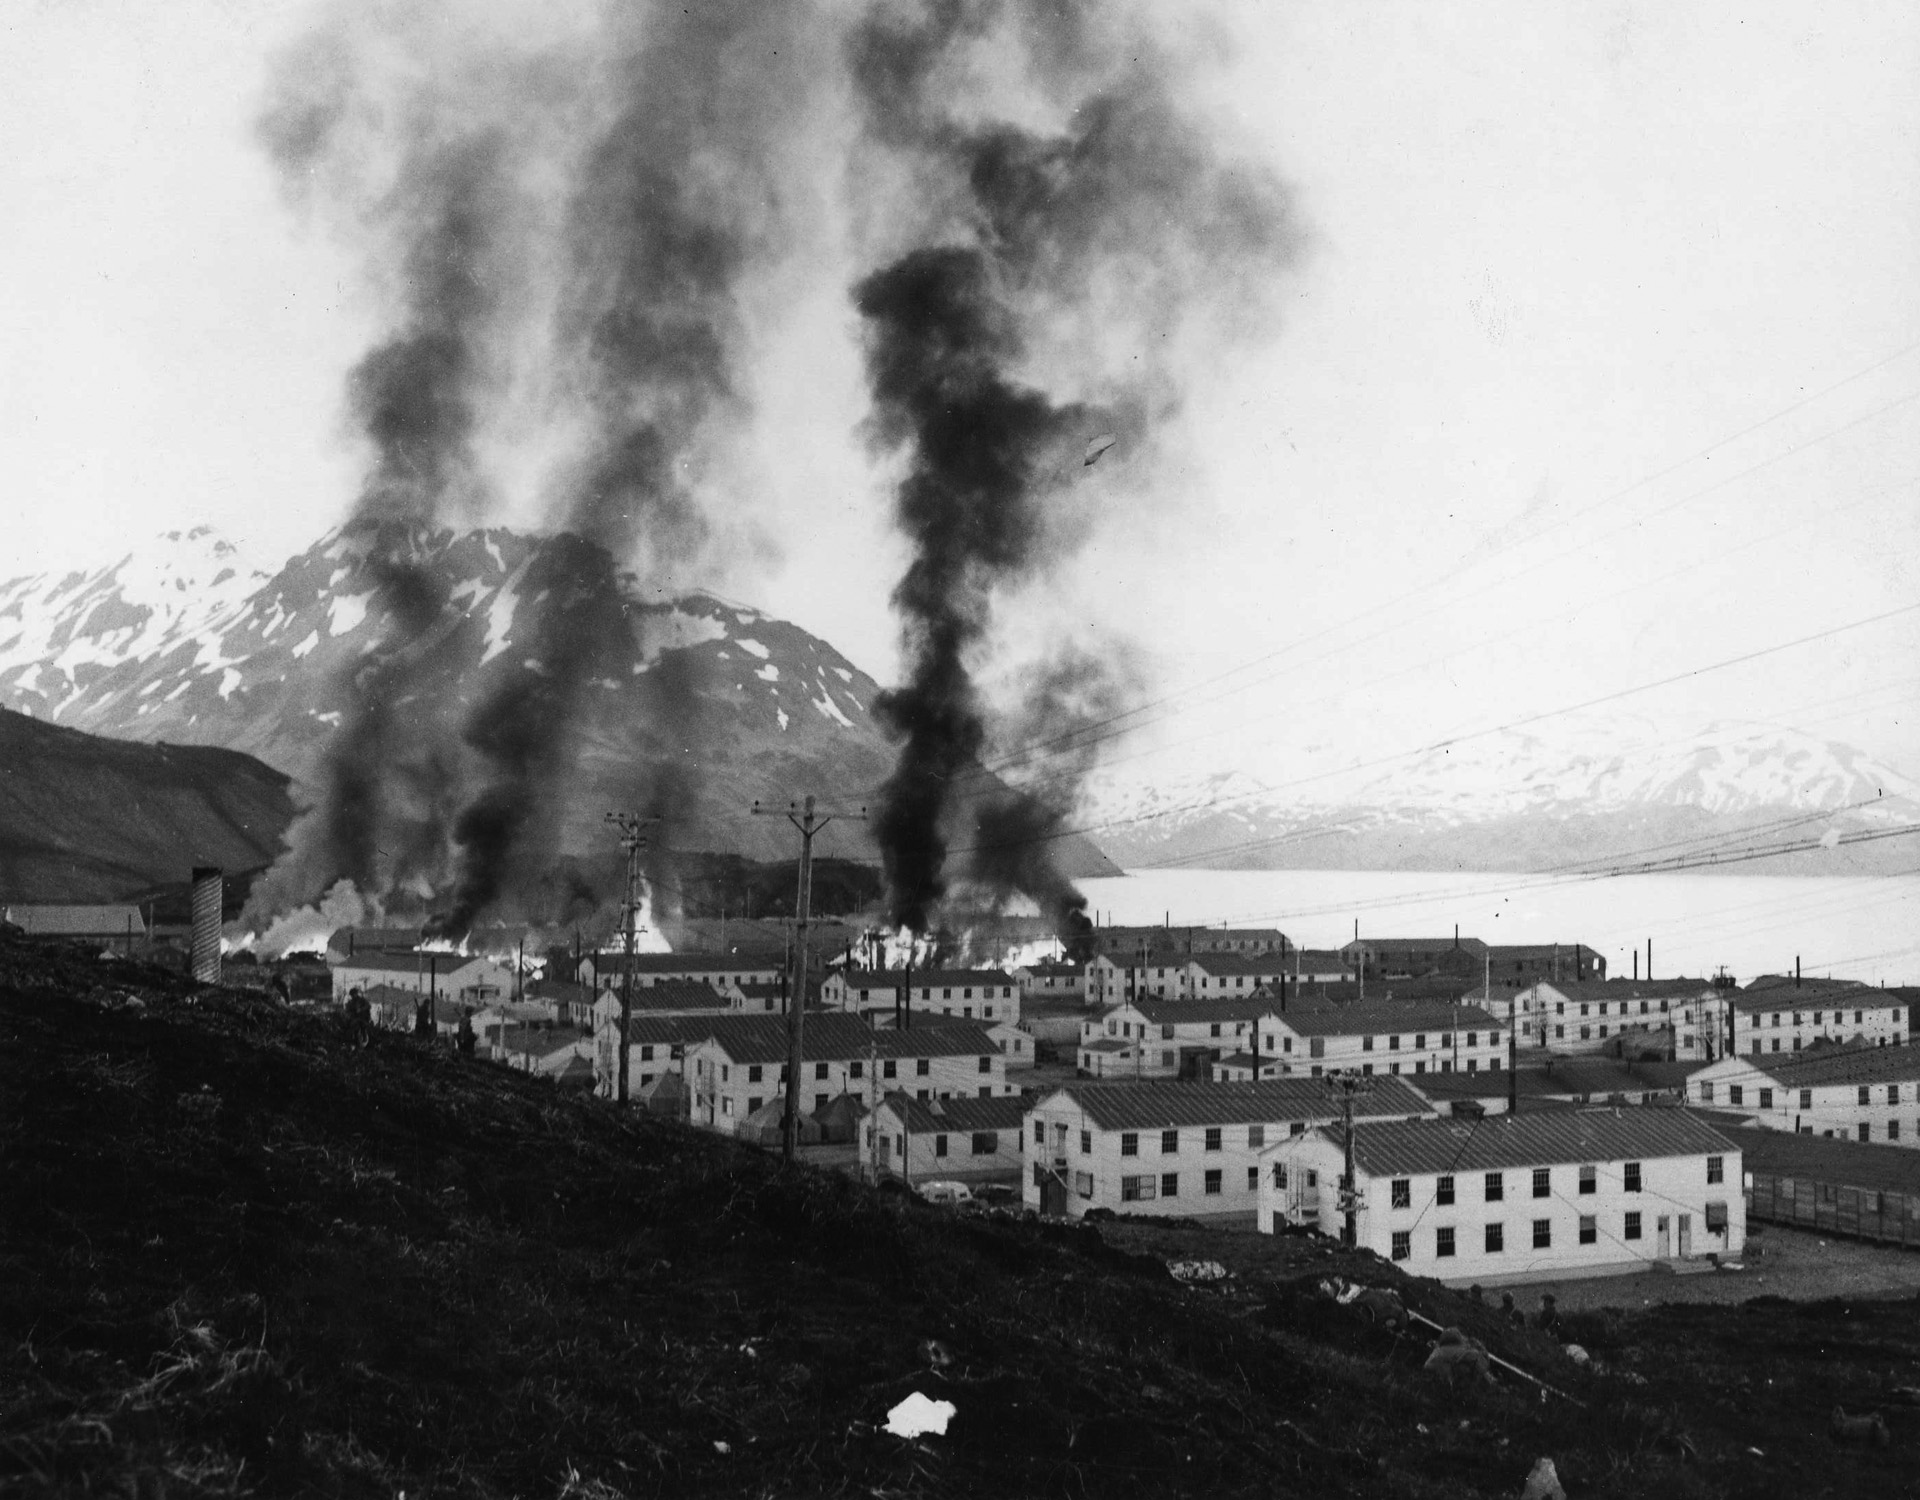 Smoke rises from the U.S. naval facility at Dutch Harbor in Alaska’s Aleutian Islands following an attack by Japanese carrier-launched torpedo aircraft on June 3, 1942. When Japanese forces occupied Attu and Kiska, it fell to the thin forces of the U.S. Alaska Defense Command to begin the initial counterattack.